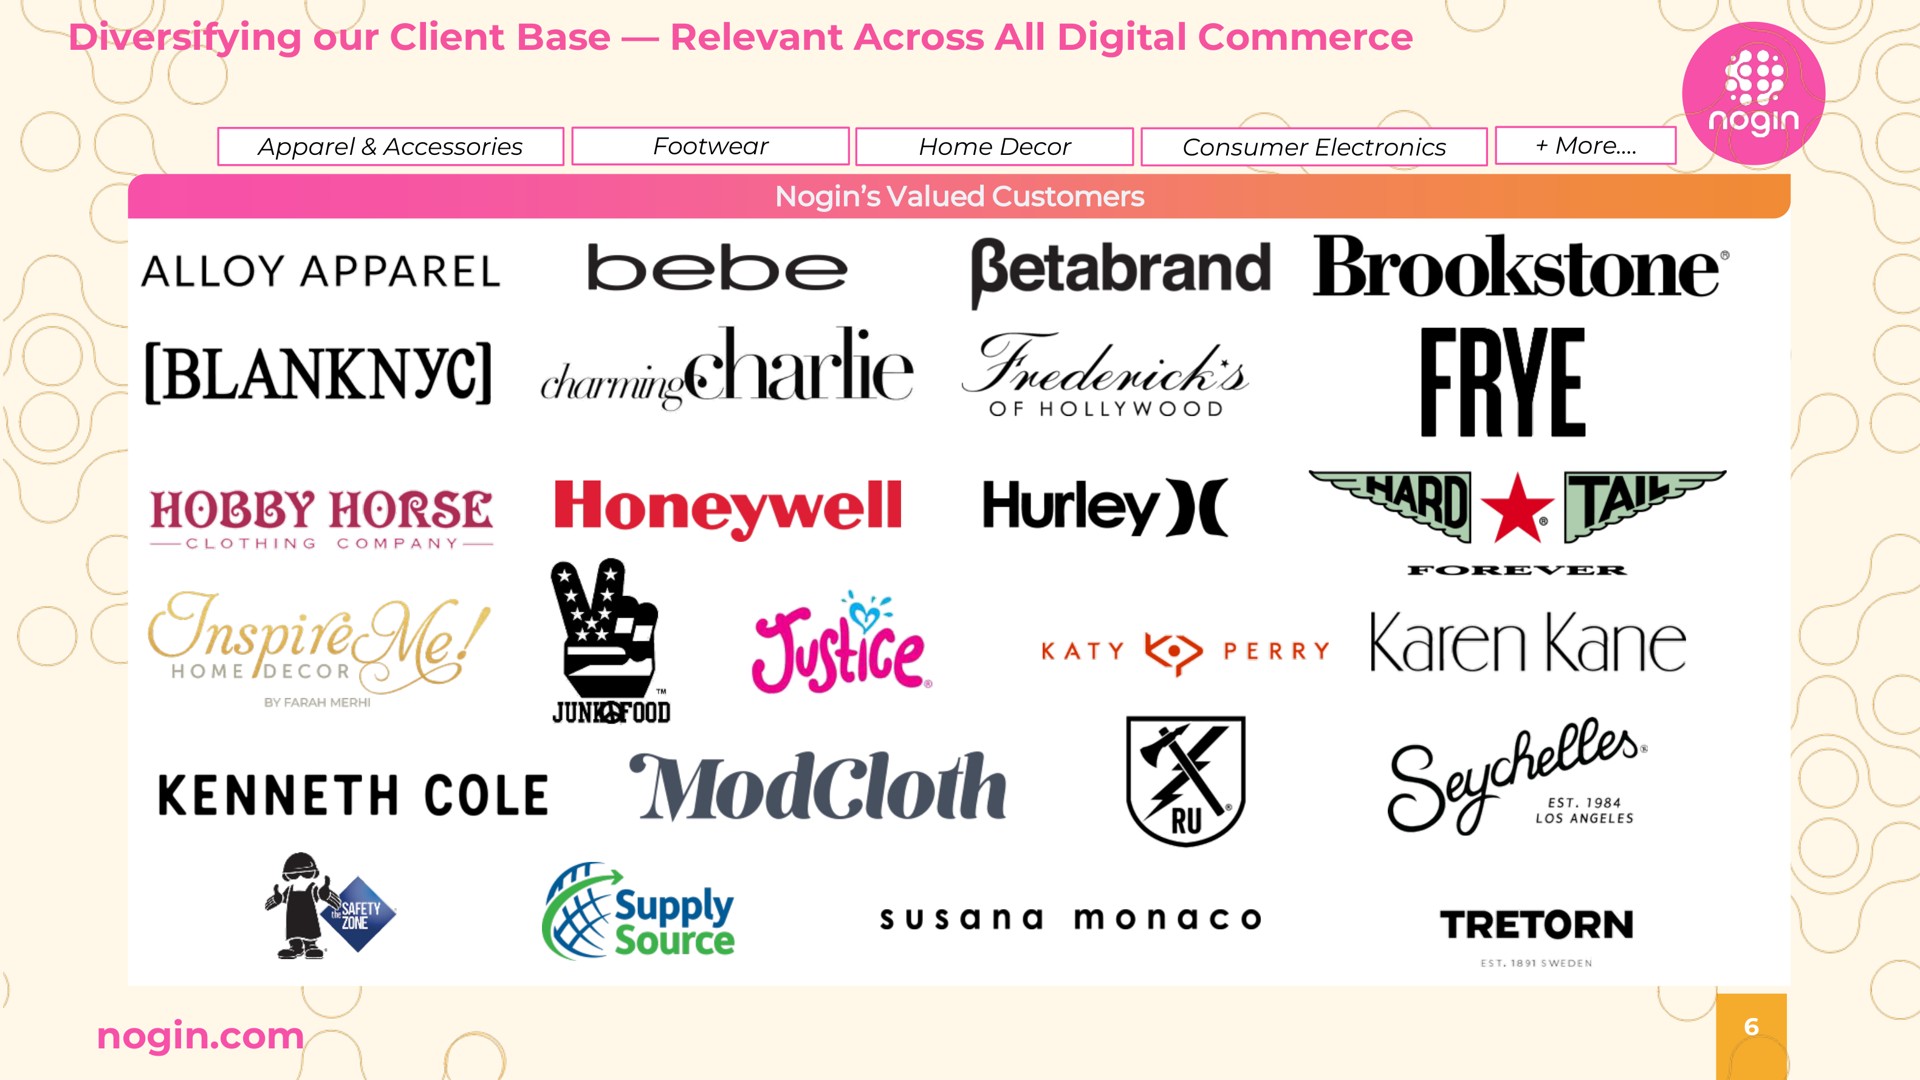 diversifying our client base relevant across all digital commerce blan darn nave hobby horse hurley a perry cole be supply | Nogin